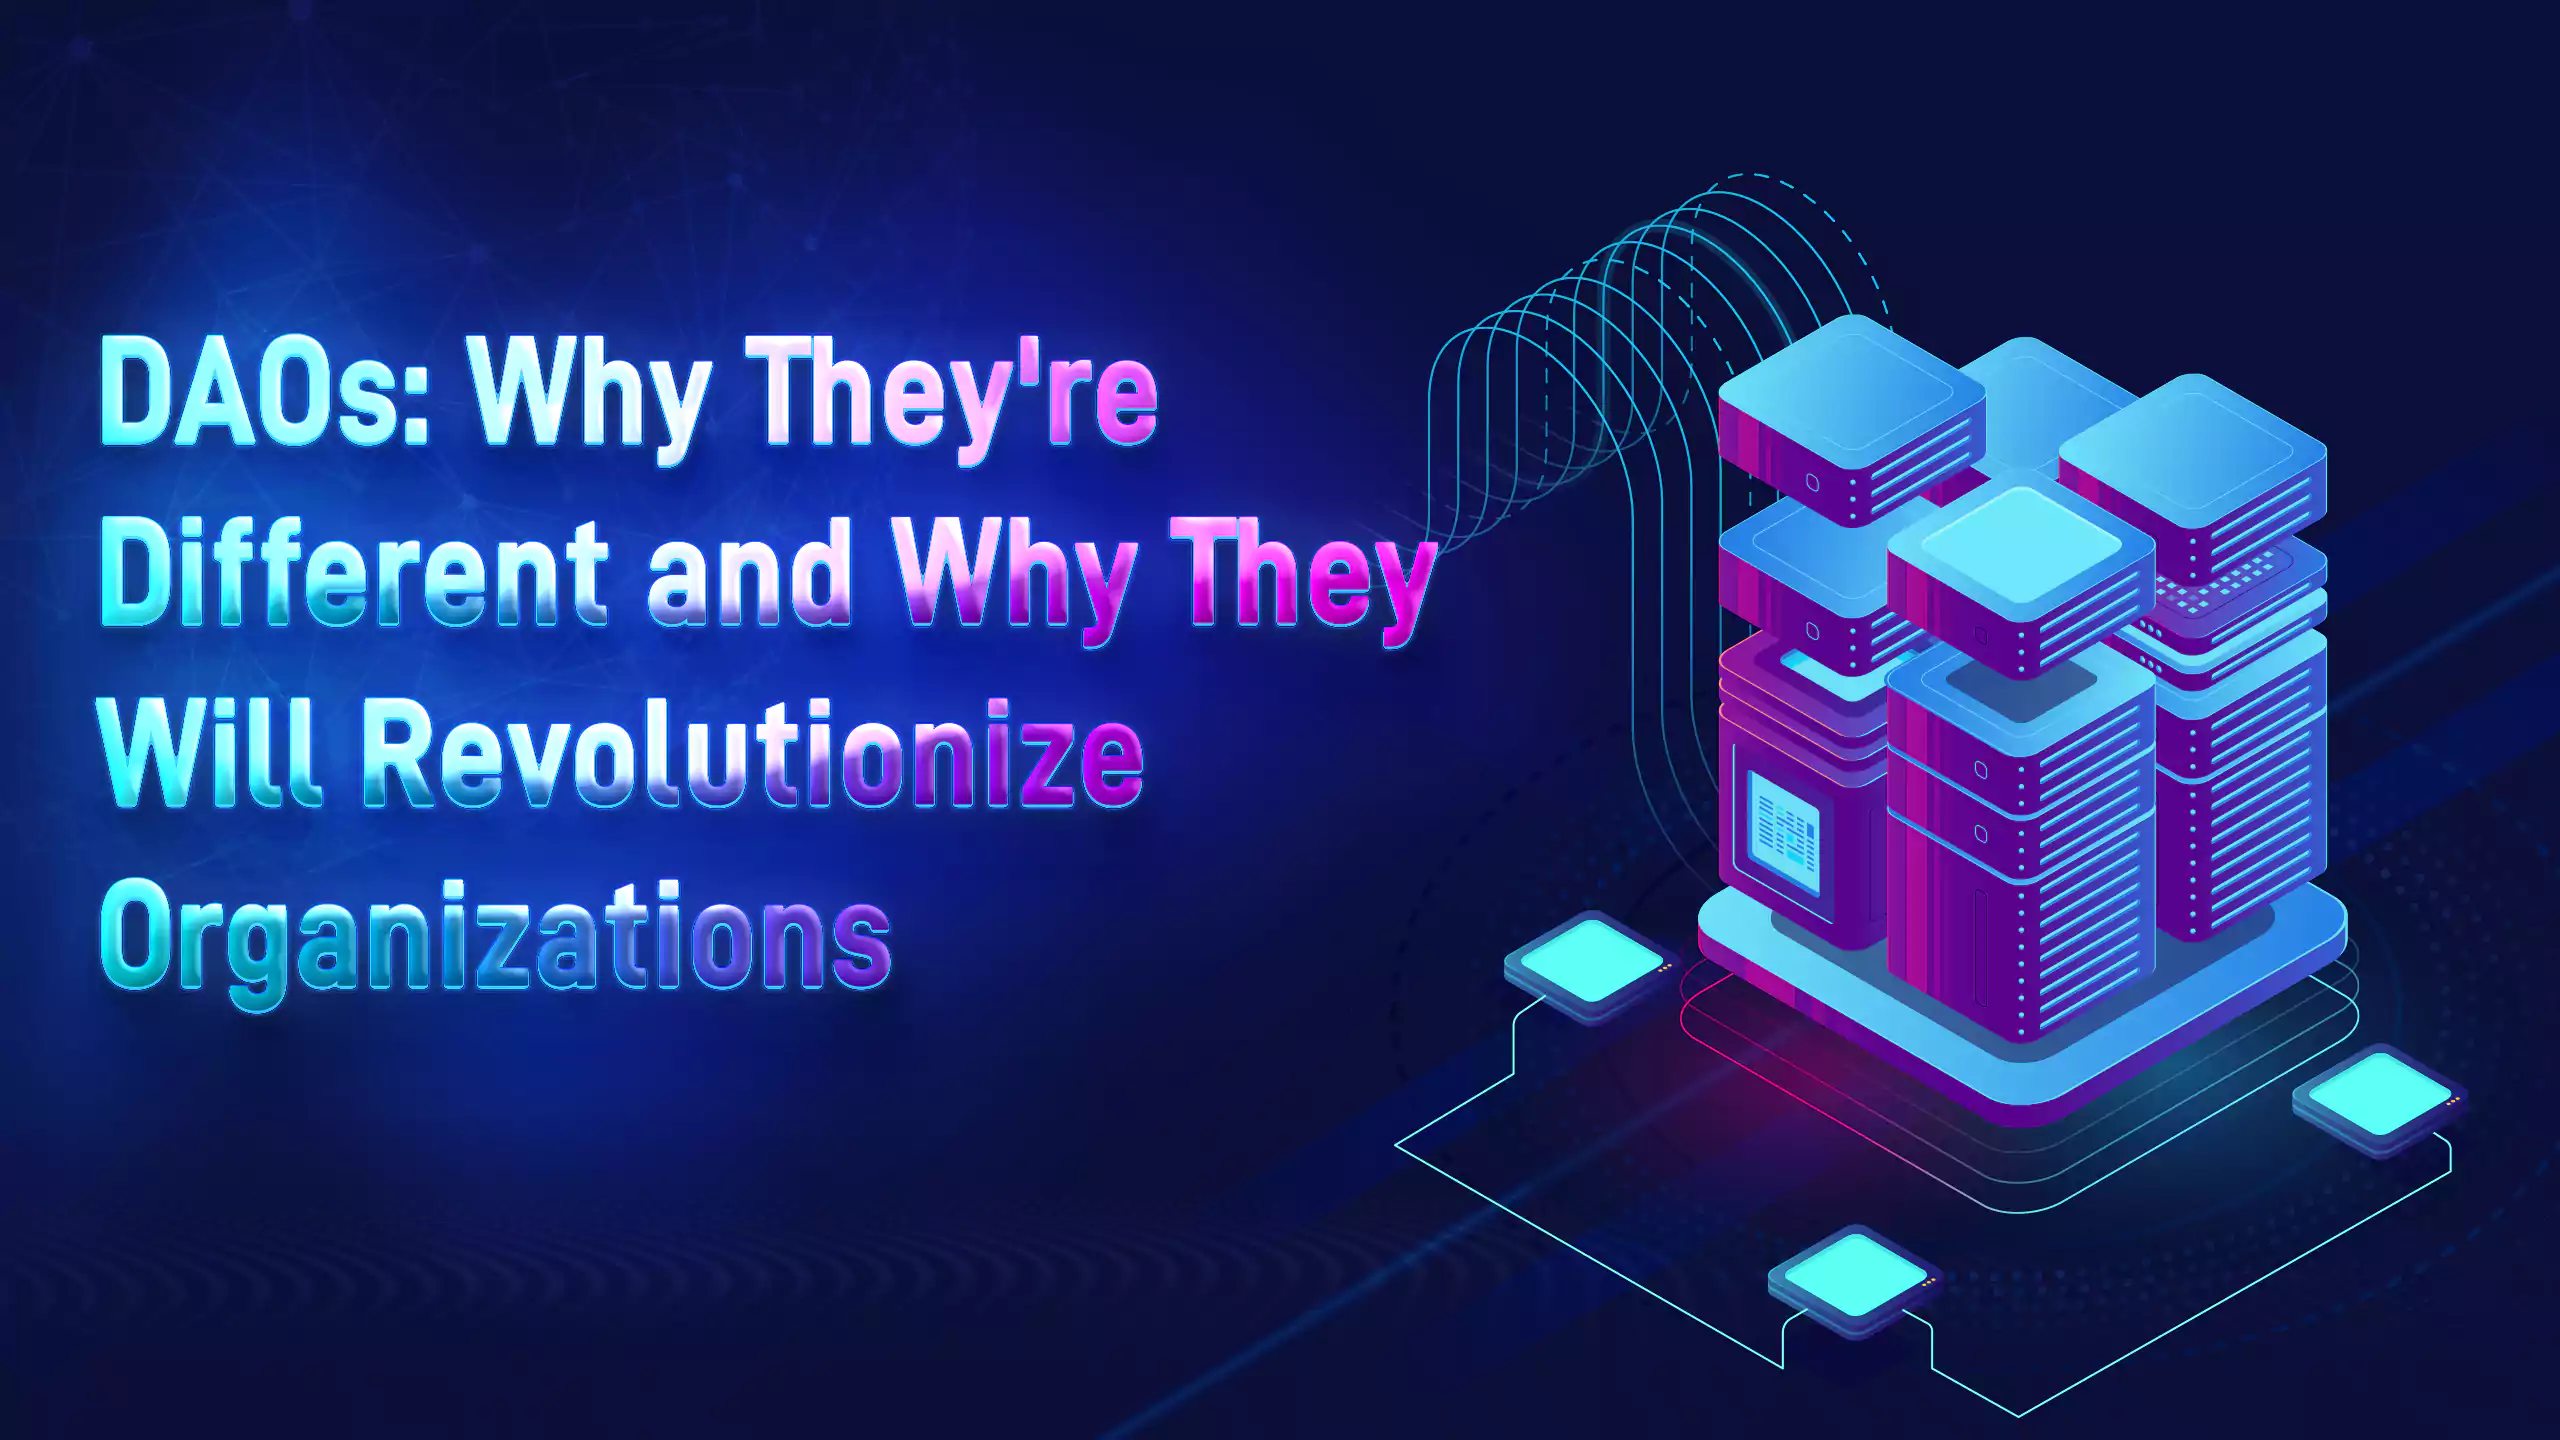 DAOs: Why They're Different and Why They Will Revolutionize Organizations